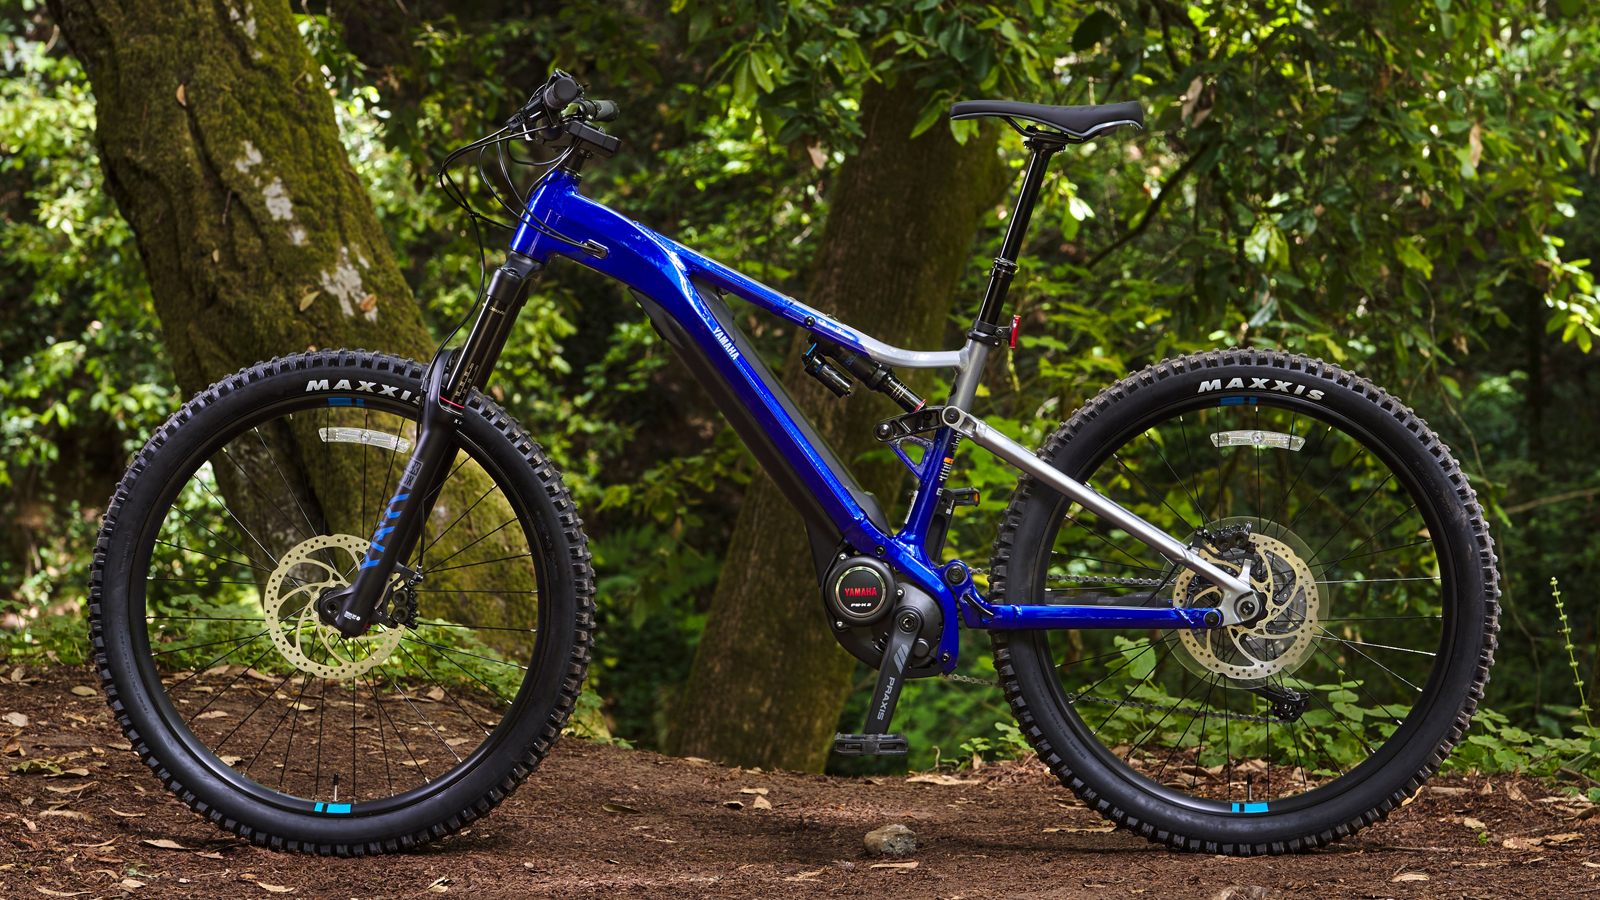 Yamaha announces an all-new, all-mountain eBike with a new motor | Bike